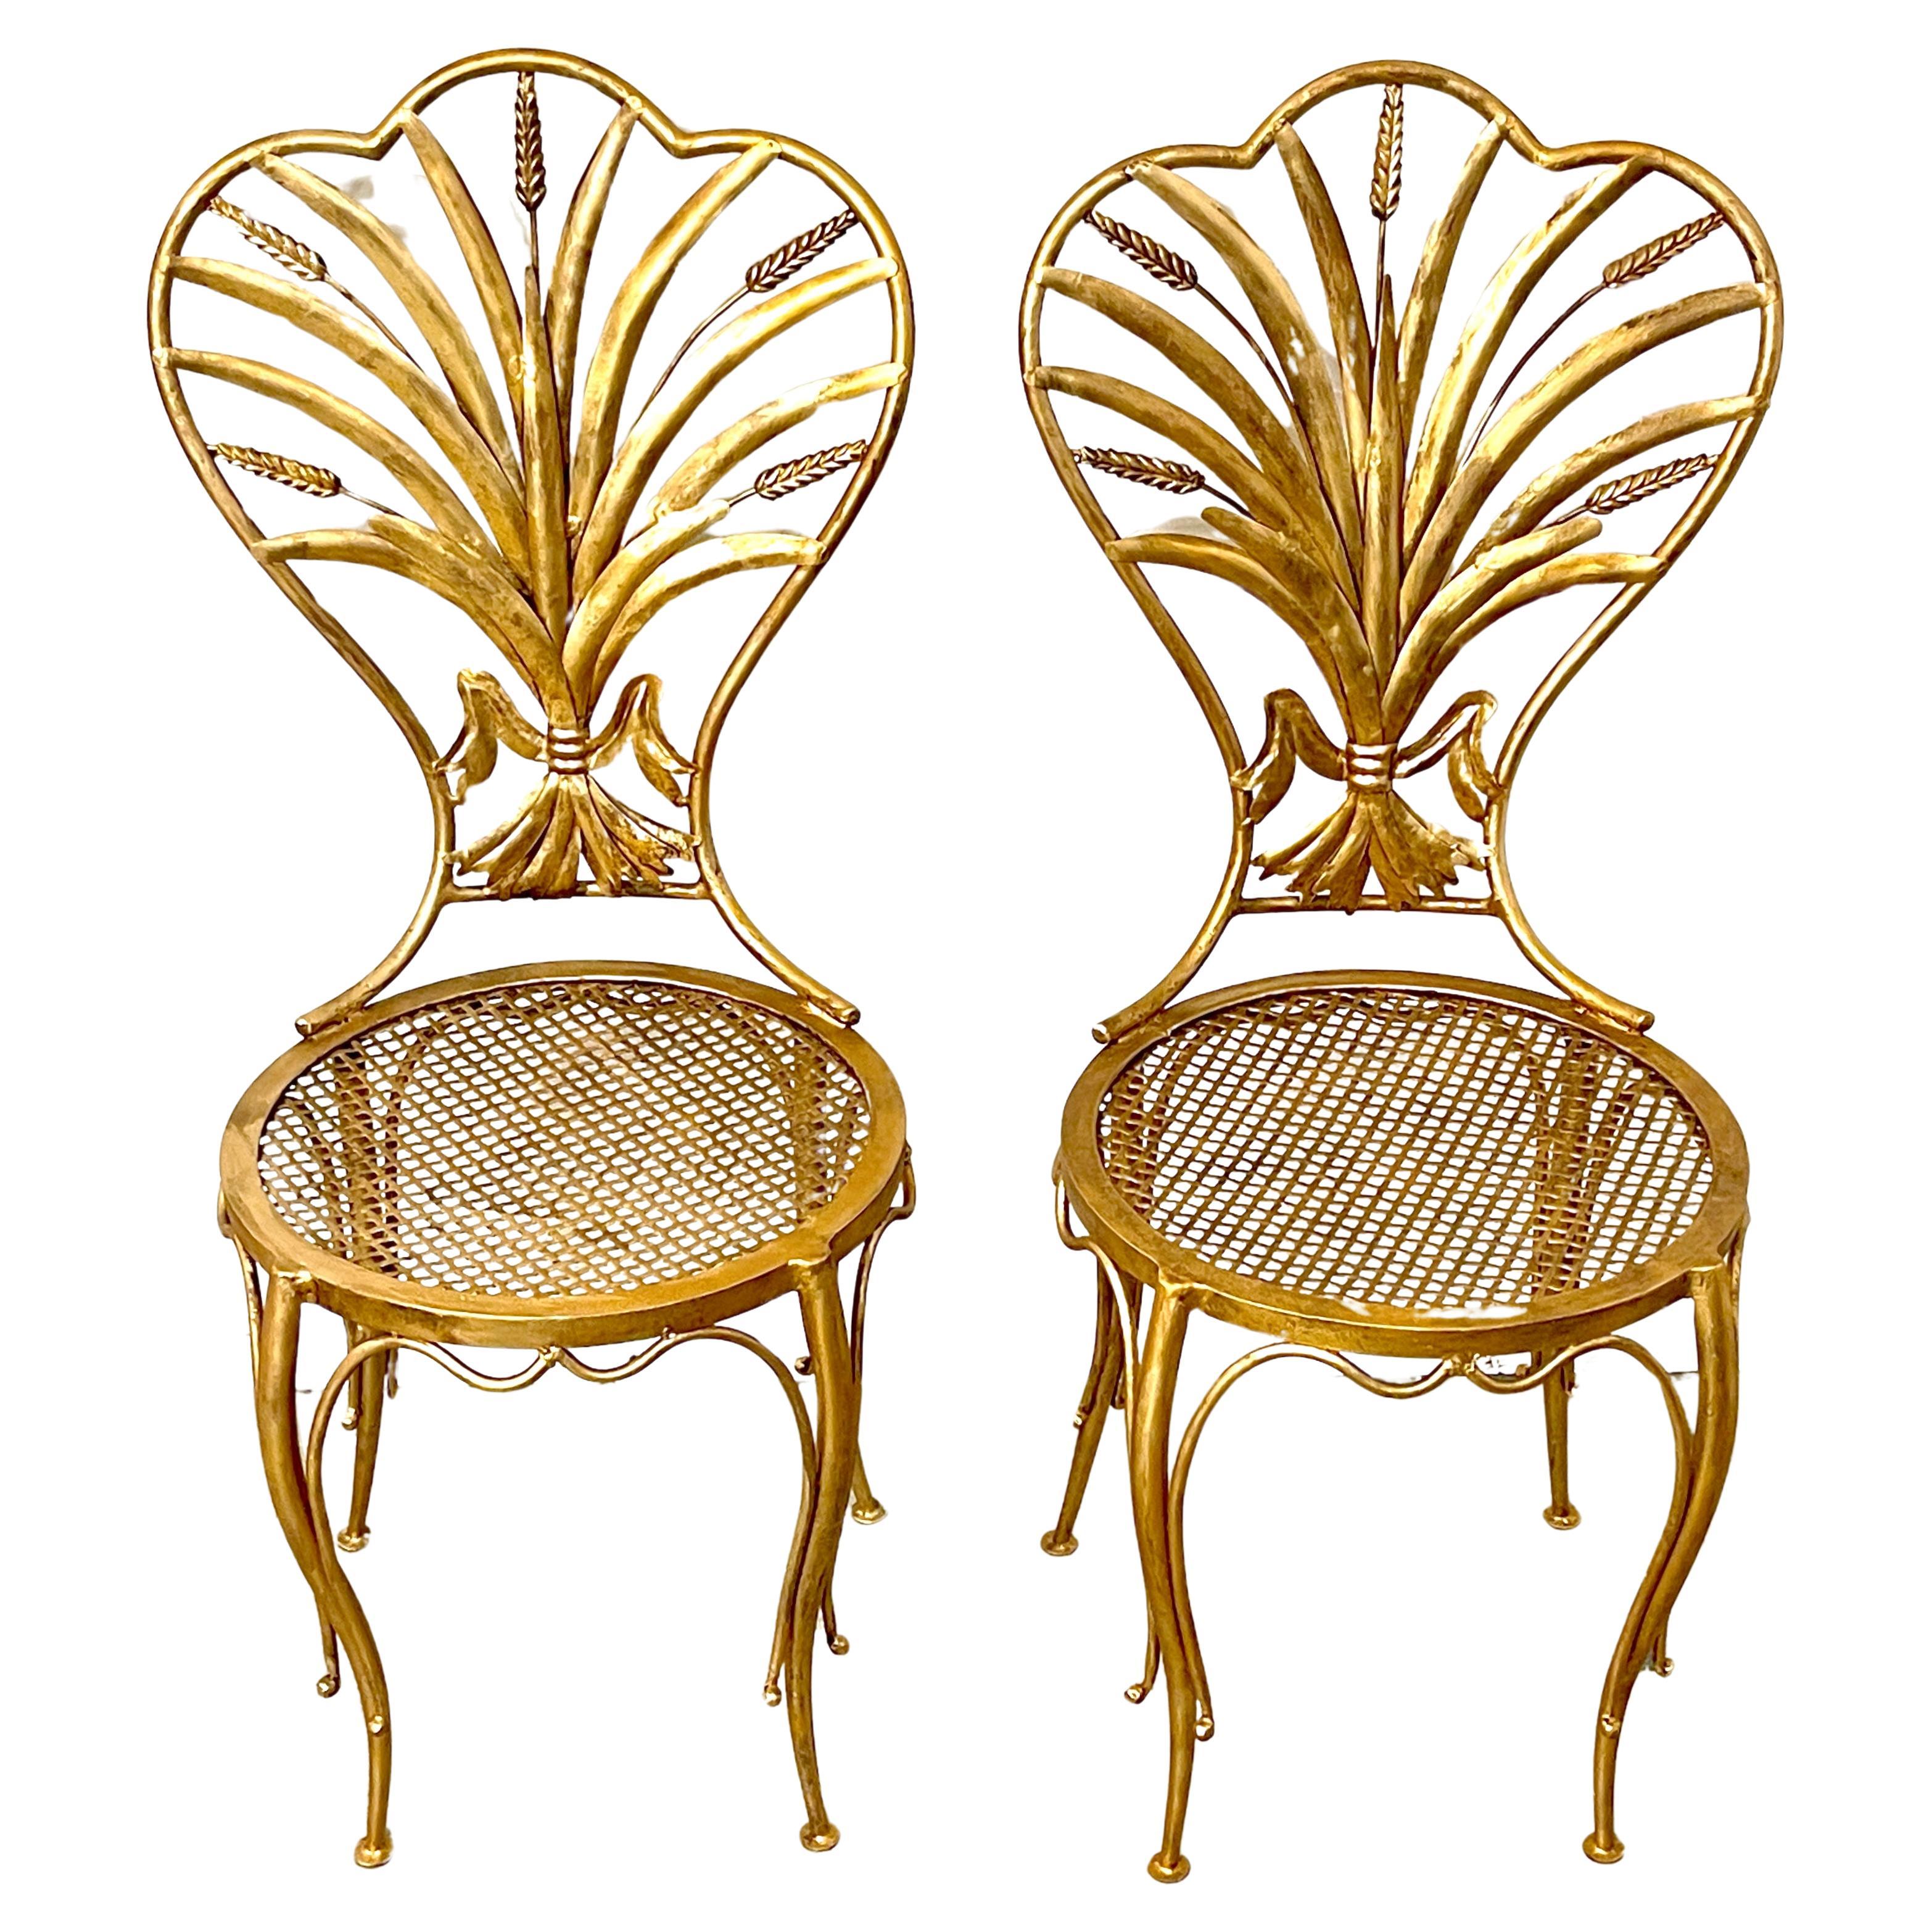 Pair of Italian Hollywood Regency Wheat Sheaf Chairs, by S. Salvadori 